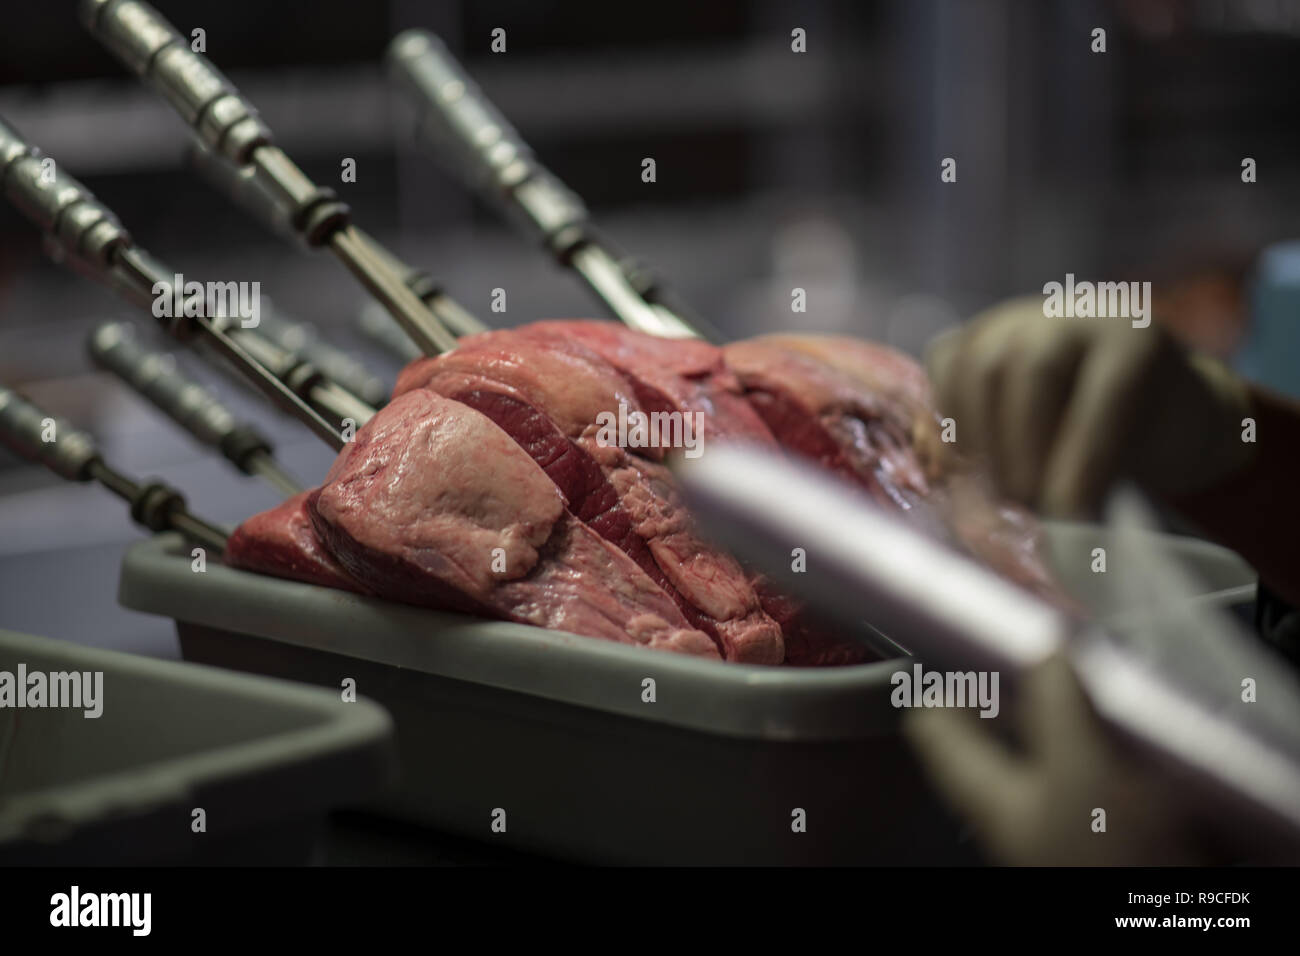 Meat being prepared for restaurant Stock Photo